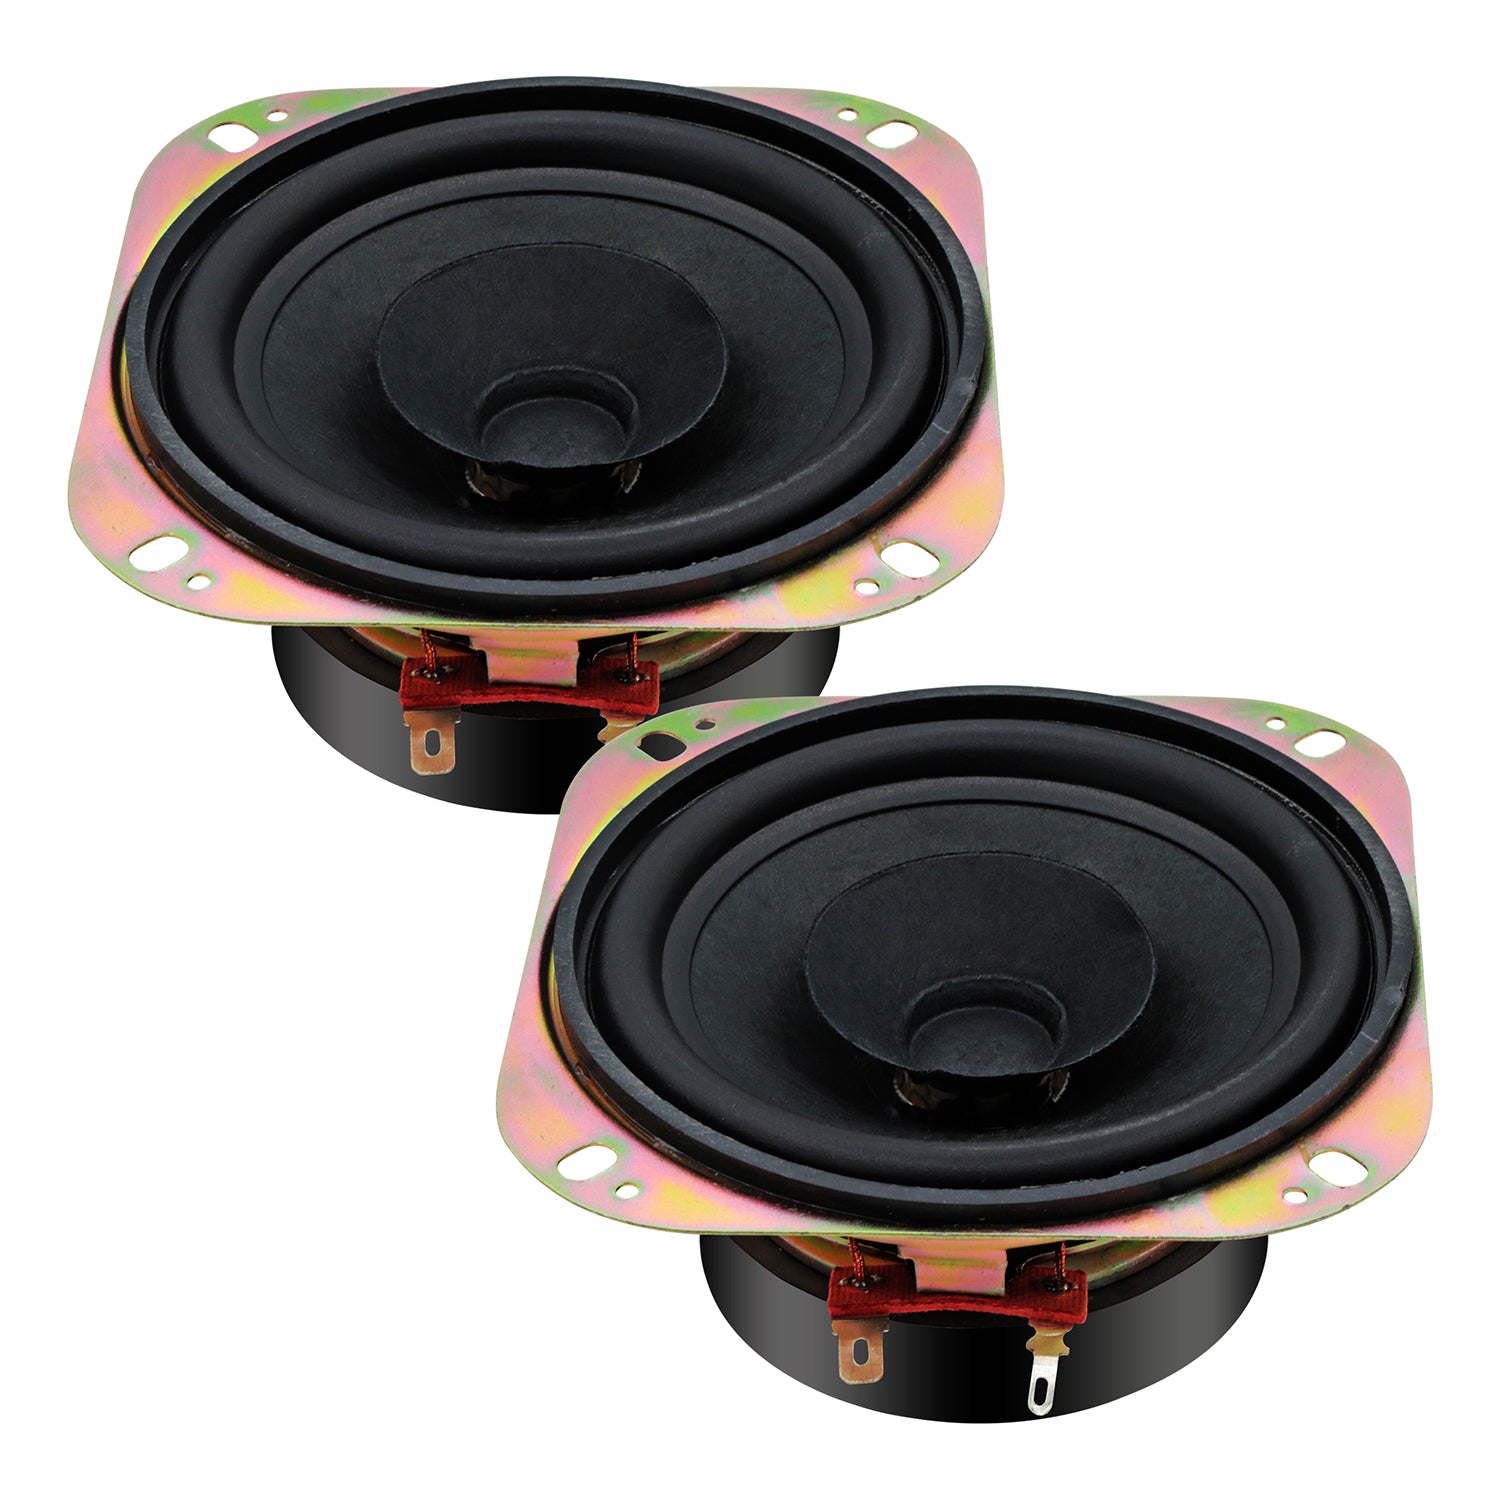 5 Core 4 Inch Subwoofer 200W Peak 4 Ohm Replacement Car Bass Sub Woofer w 0.81" Voice Coil 2 Pack